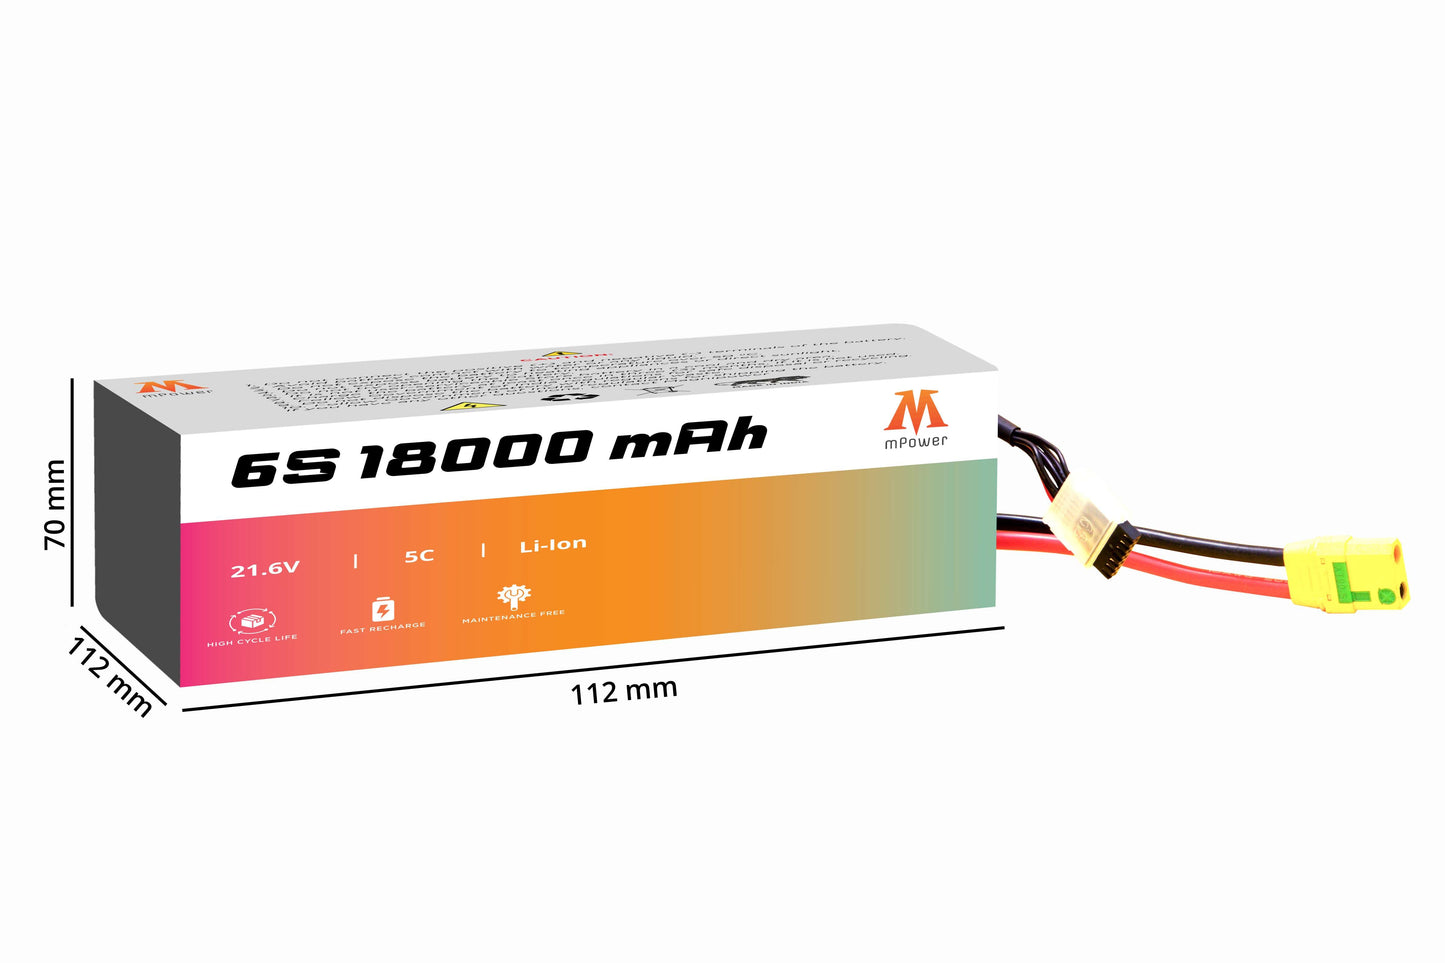 mPower 6S 18000mAh Lithium-Ion Battery for Surveillance Drones